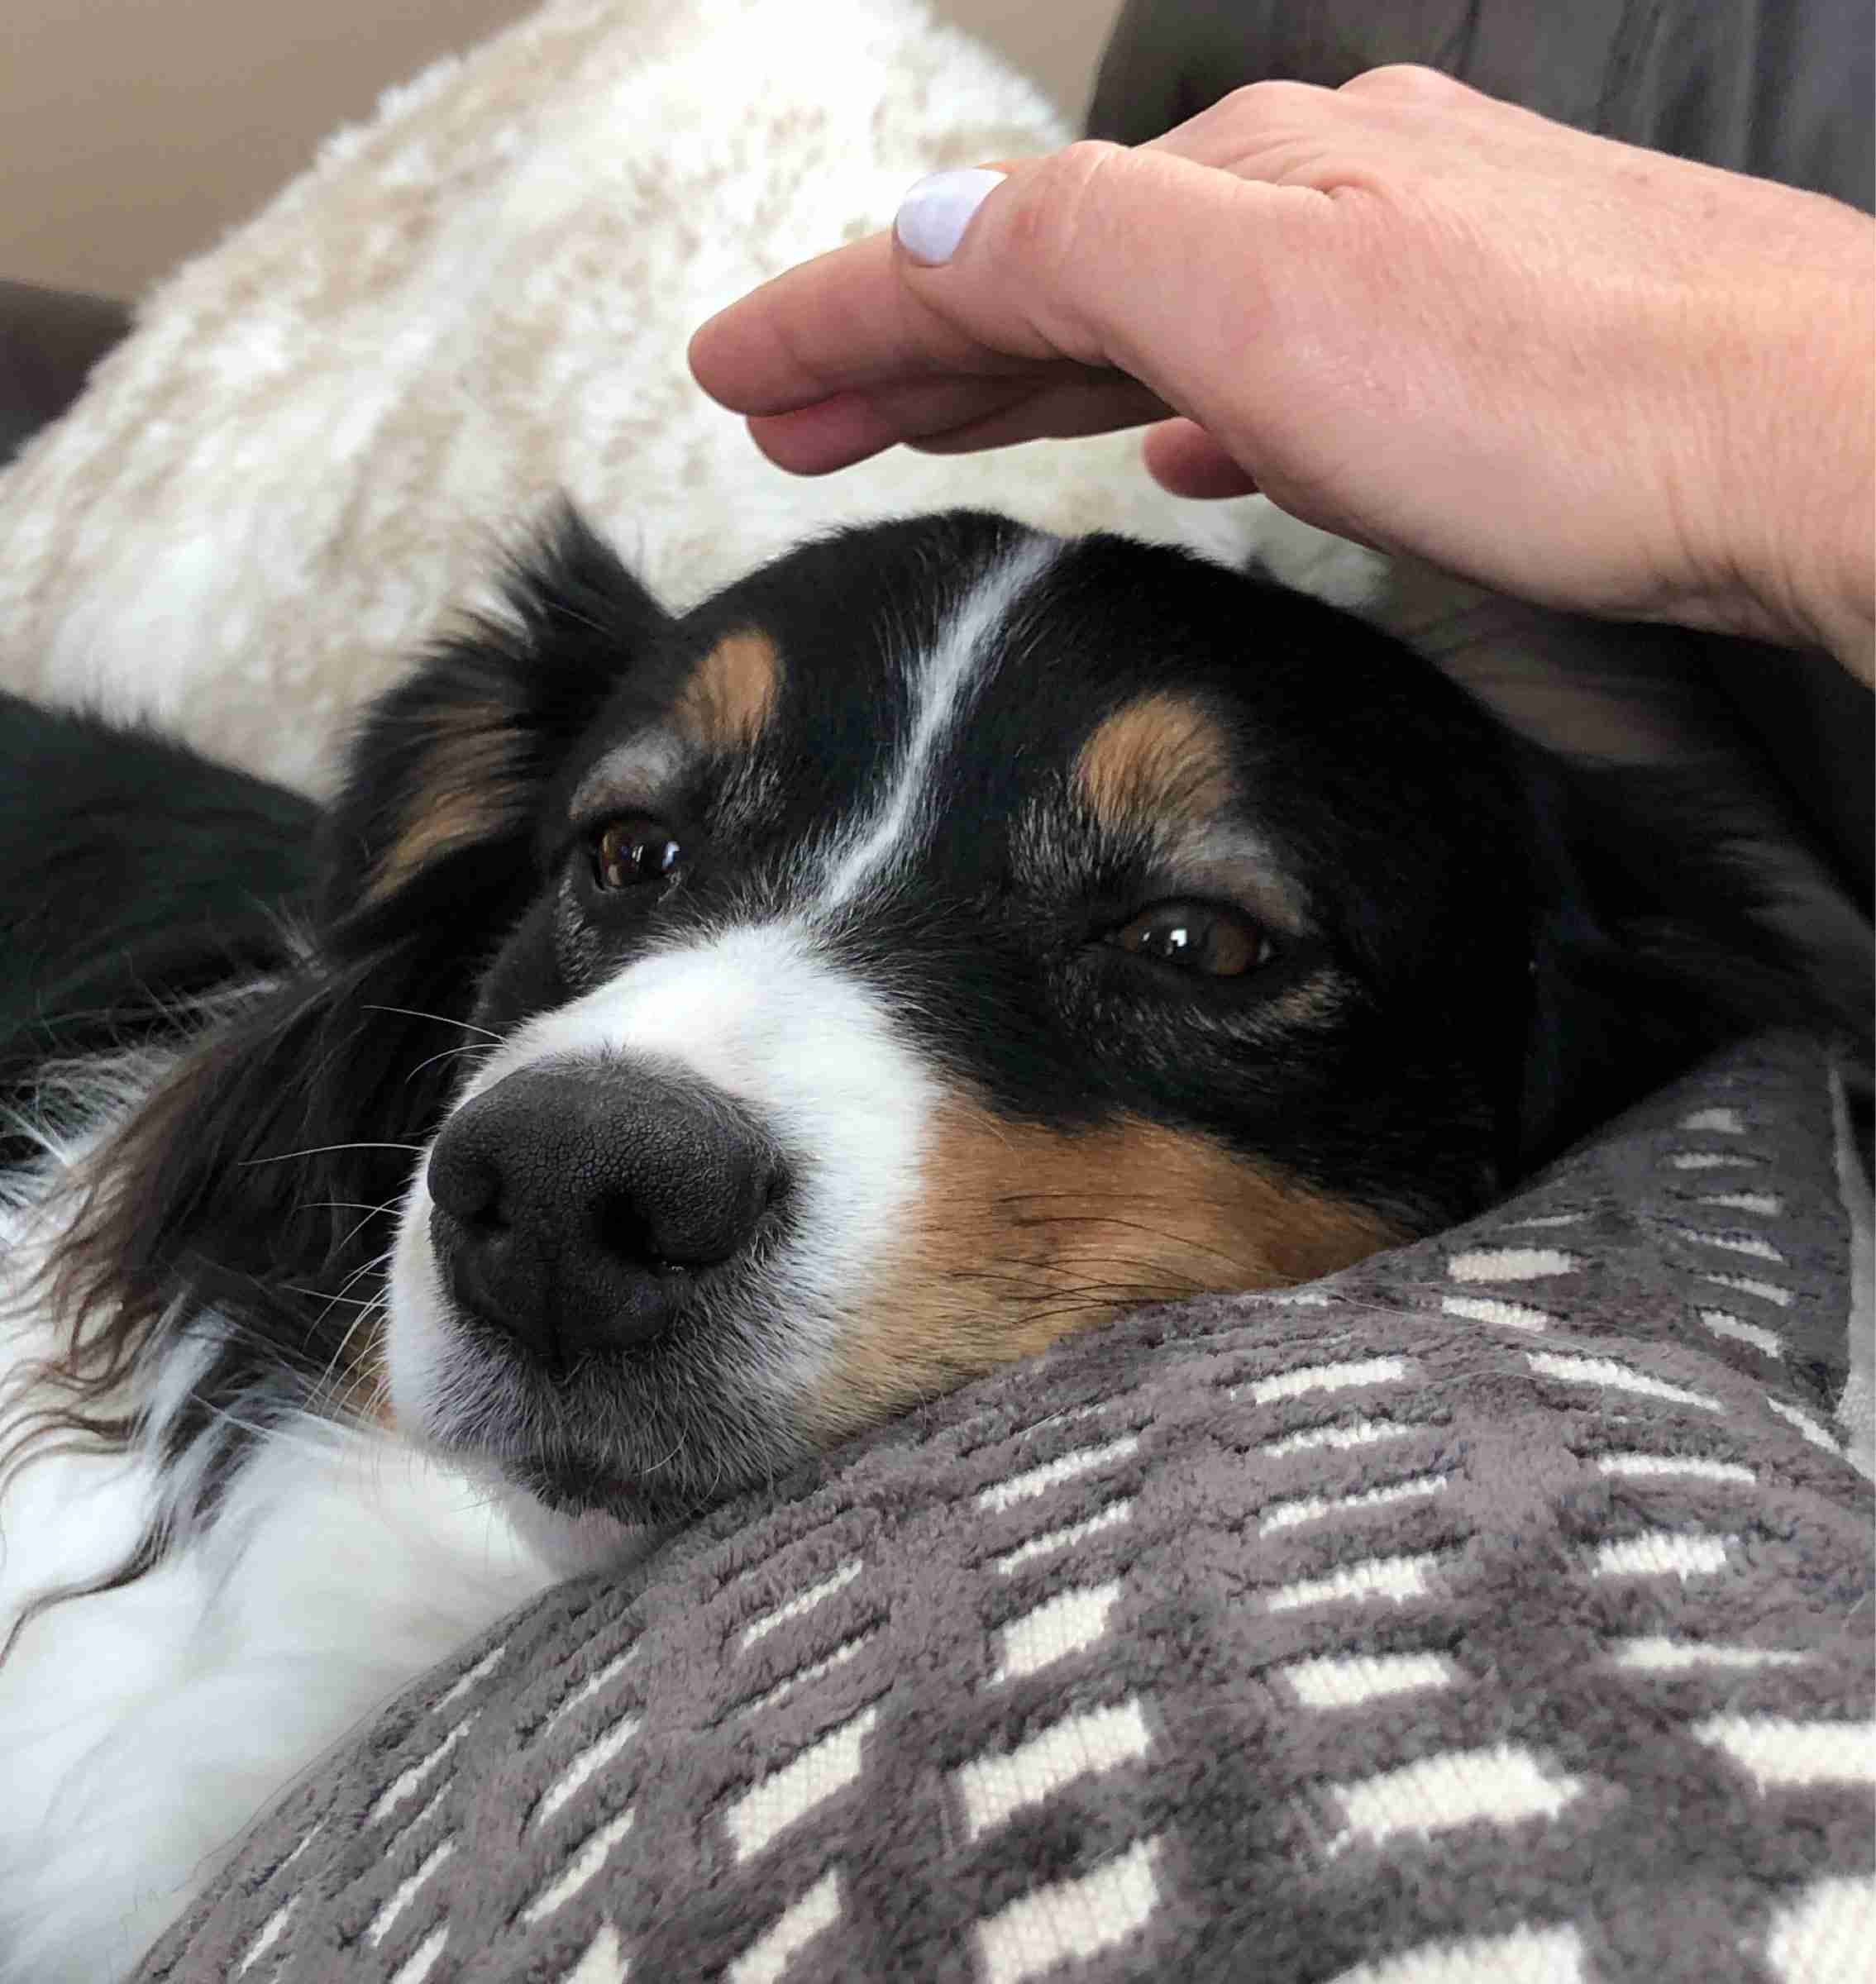 A dog lying peacefully on a pillow receiving reiki therapy massage